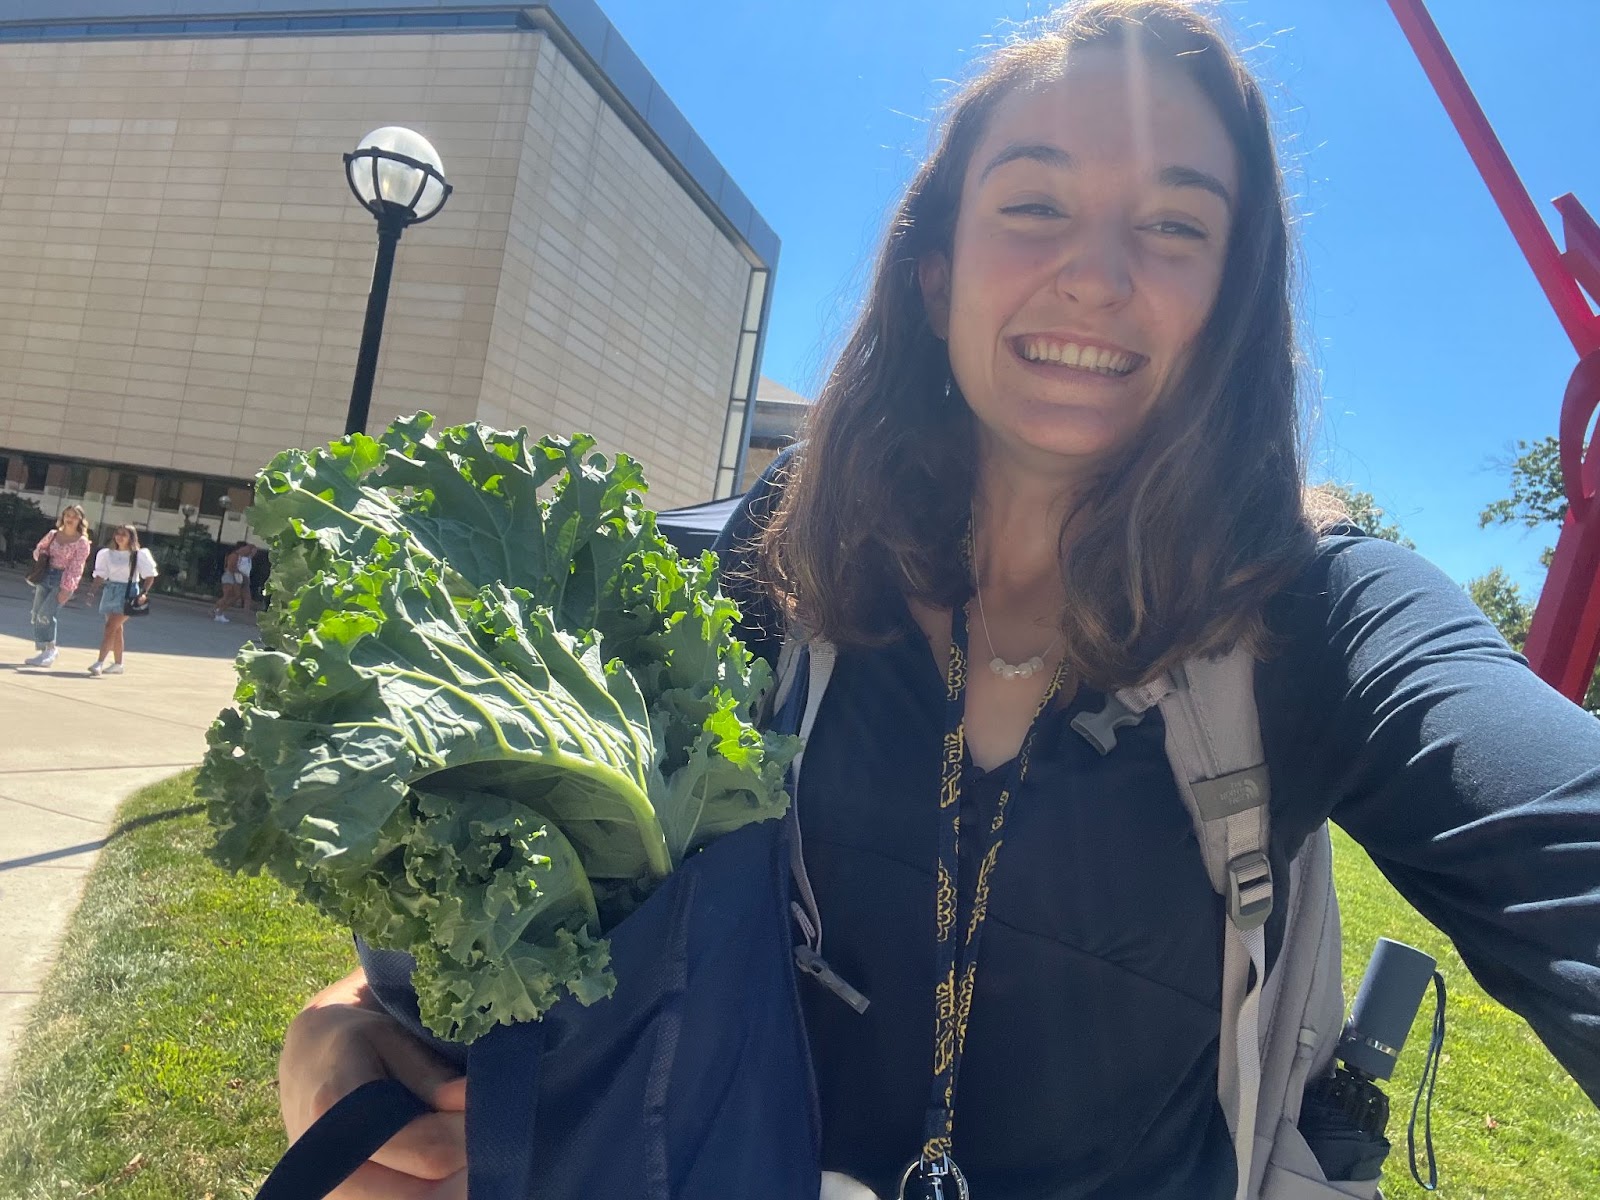 Me smiling with kale, courtesy of the Campus Farm Stand